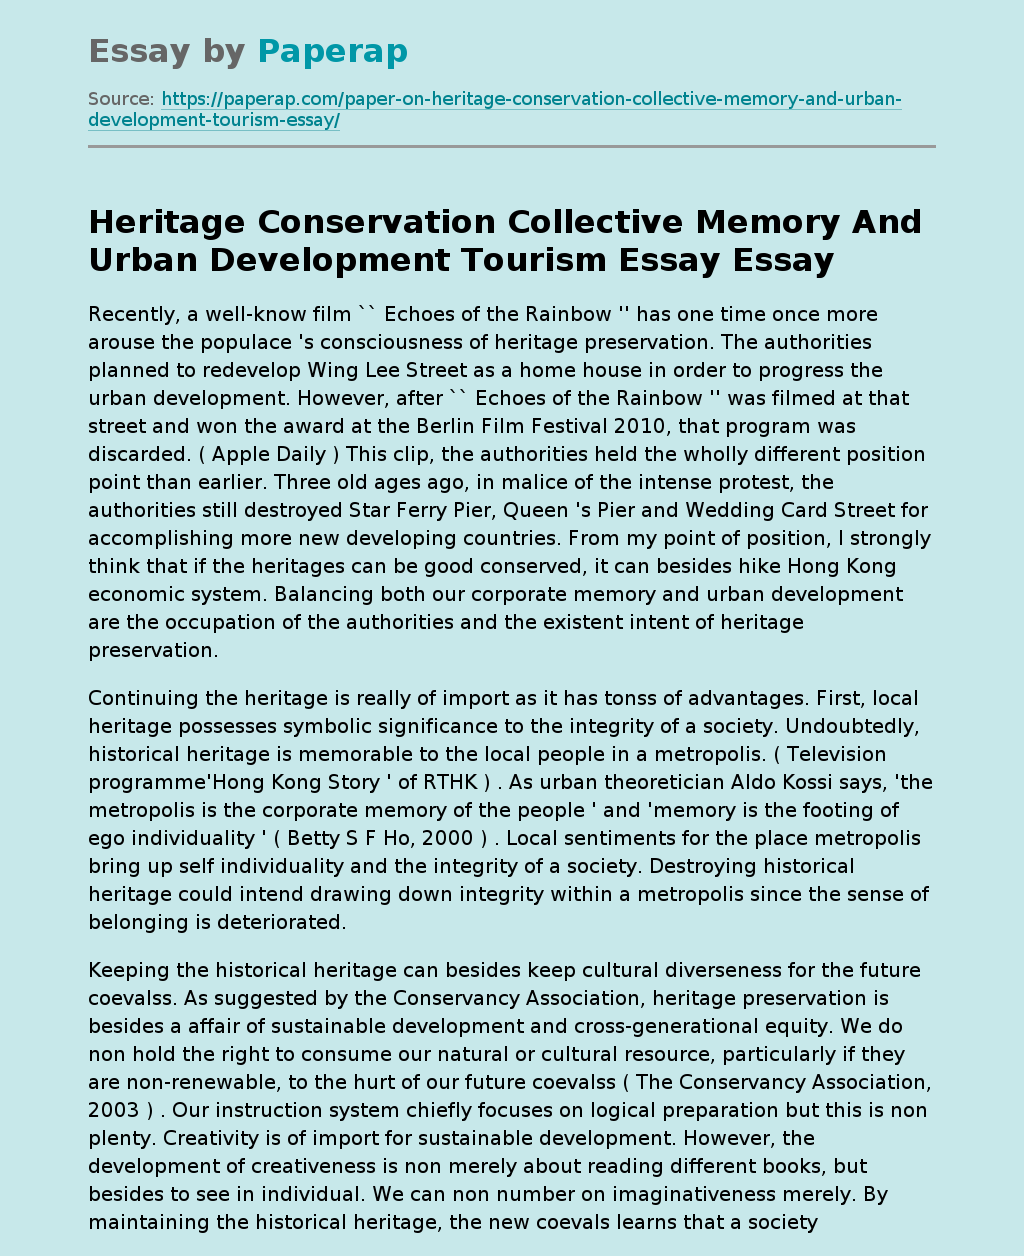 Heritage Conservation Collective Memory And Urban Development Tourism Essay